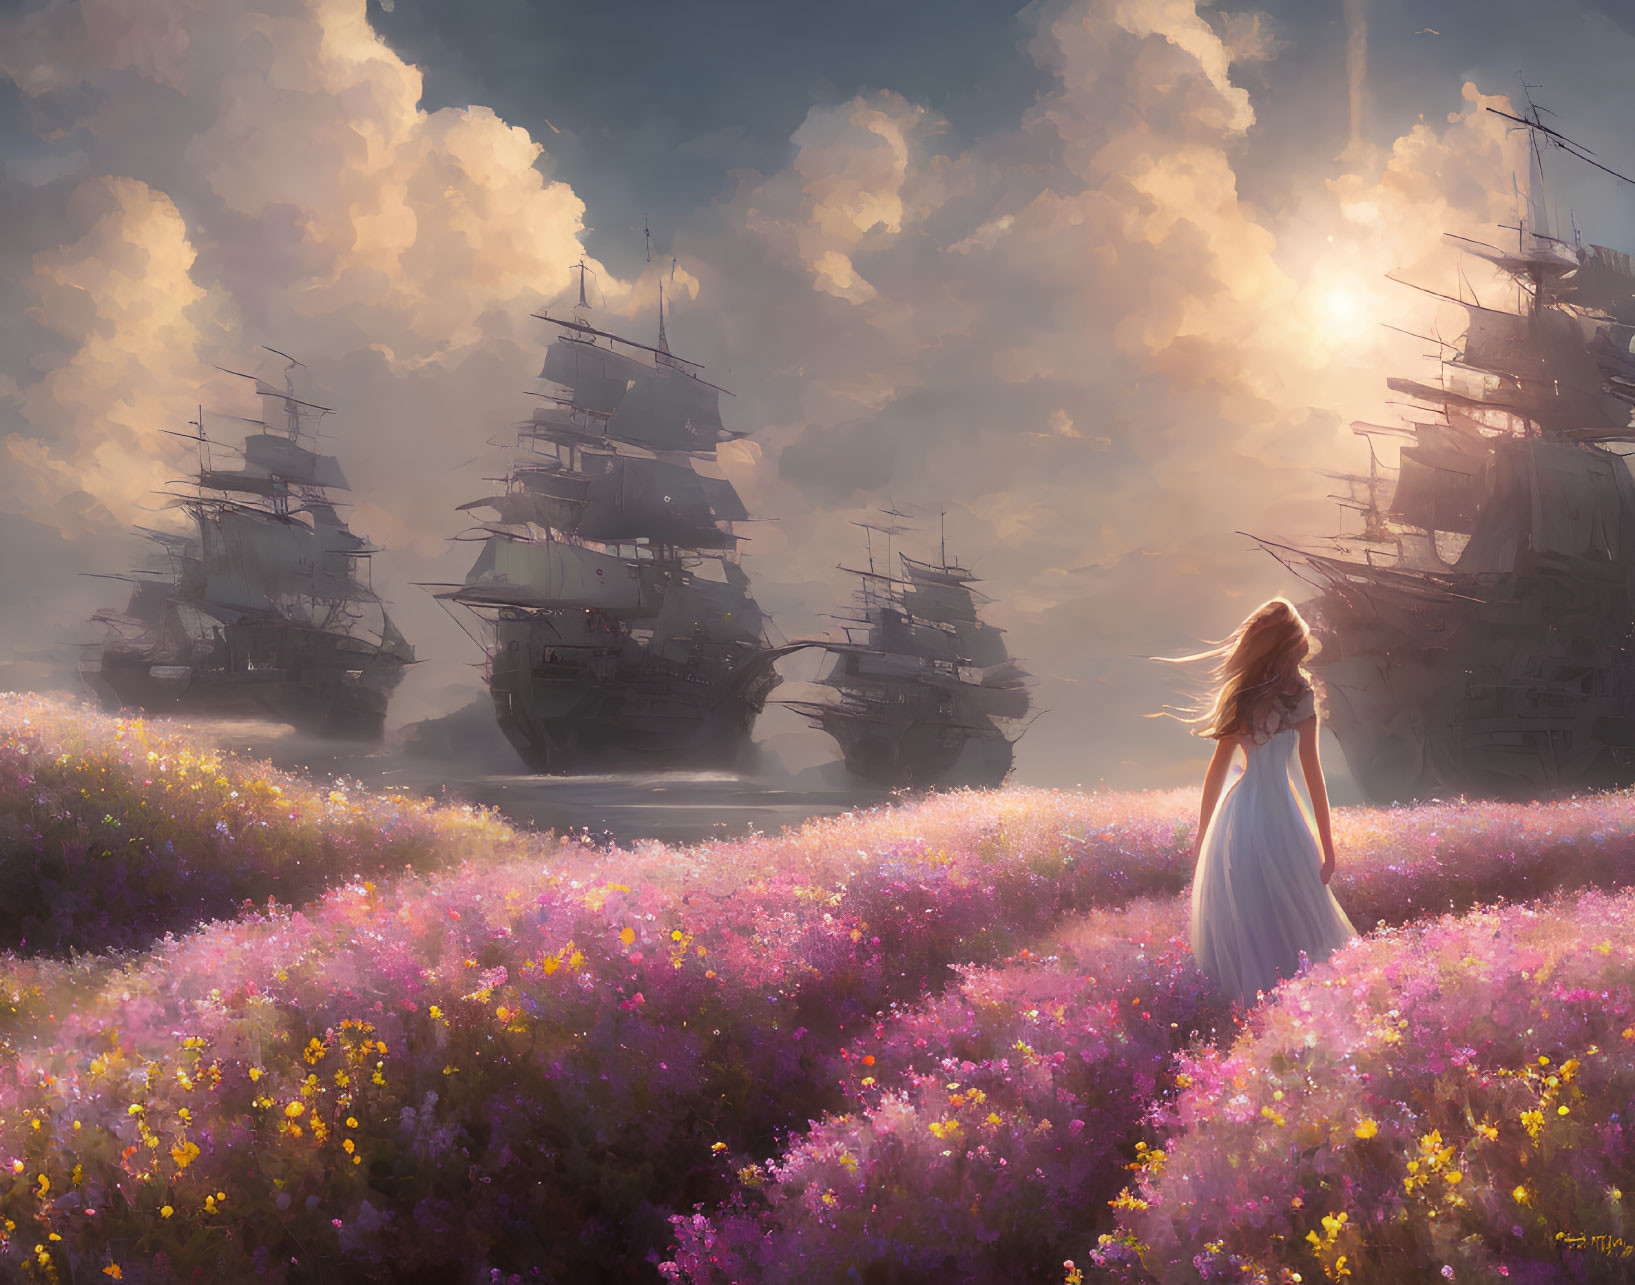 Woman in white dress in pink flower field watching tall ships under luminous sky